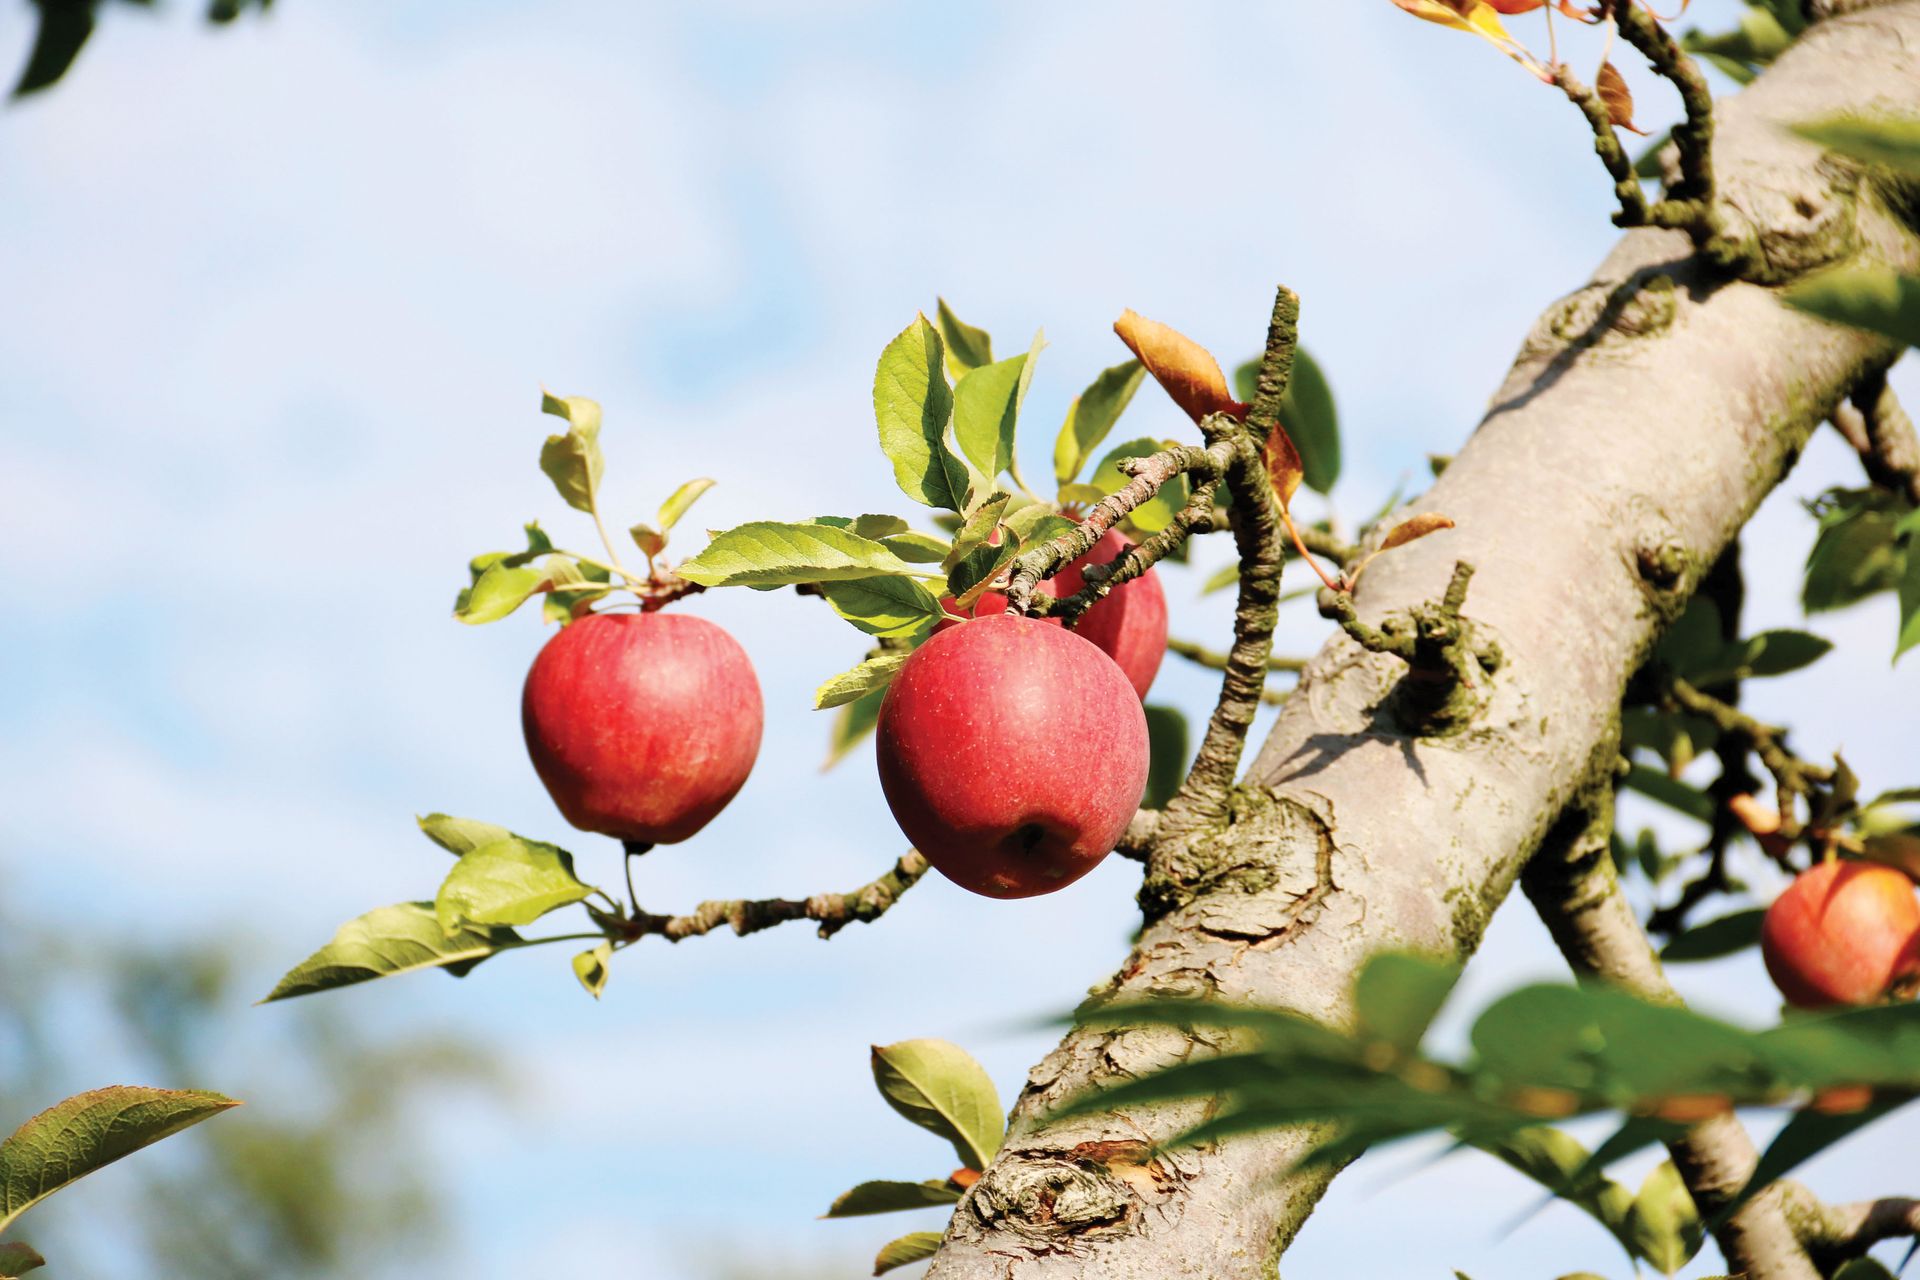 A photograph of apples on an apple tree.